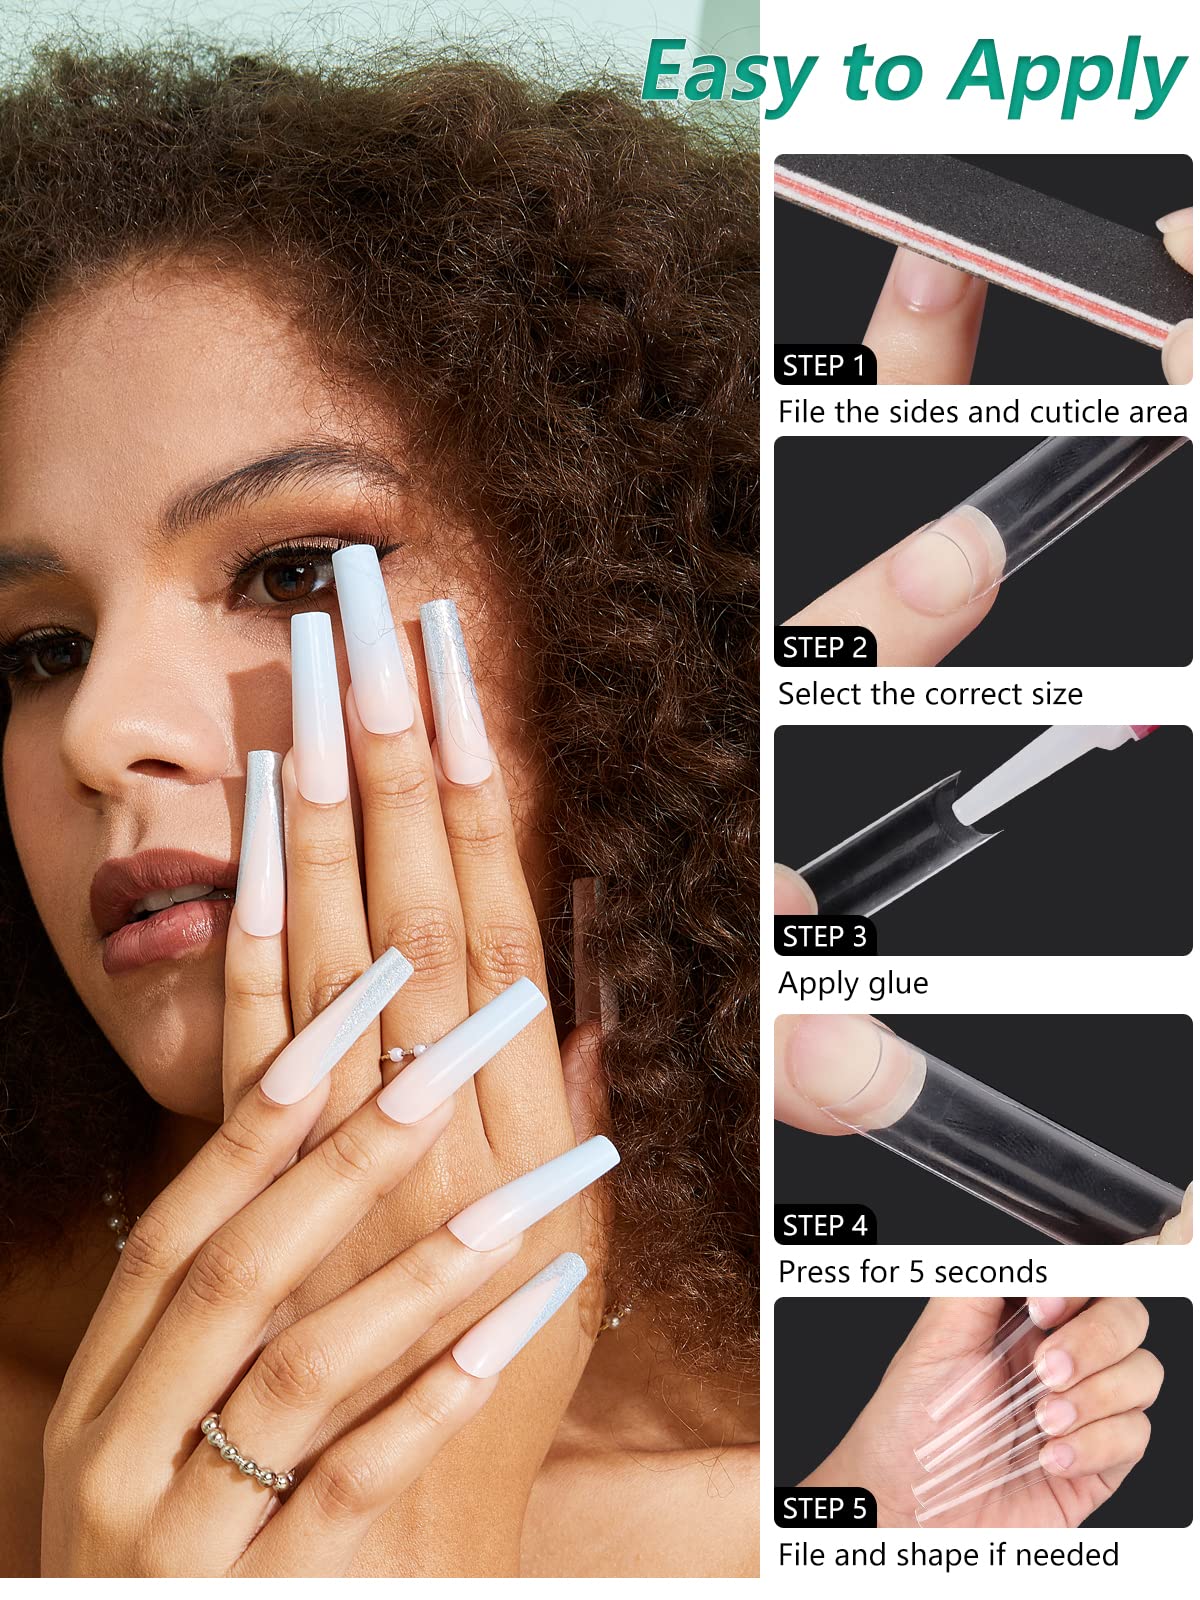 504 PCS No C Curve Clear Nail Tips for Acrylic Nails Professional, 3XL Extra Long, 12 Sizes Half Cover Straight Tapered Square French Fake Nail Tips for Nail Salons Home DIY